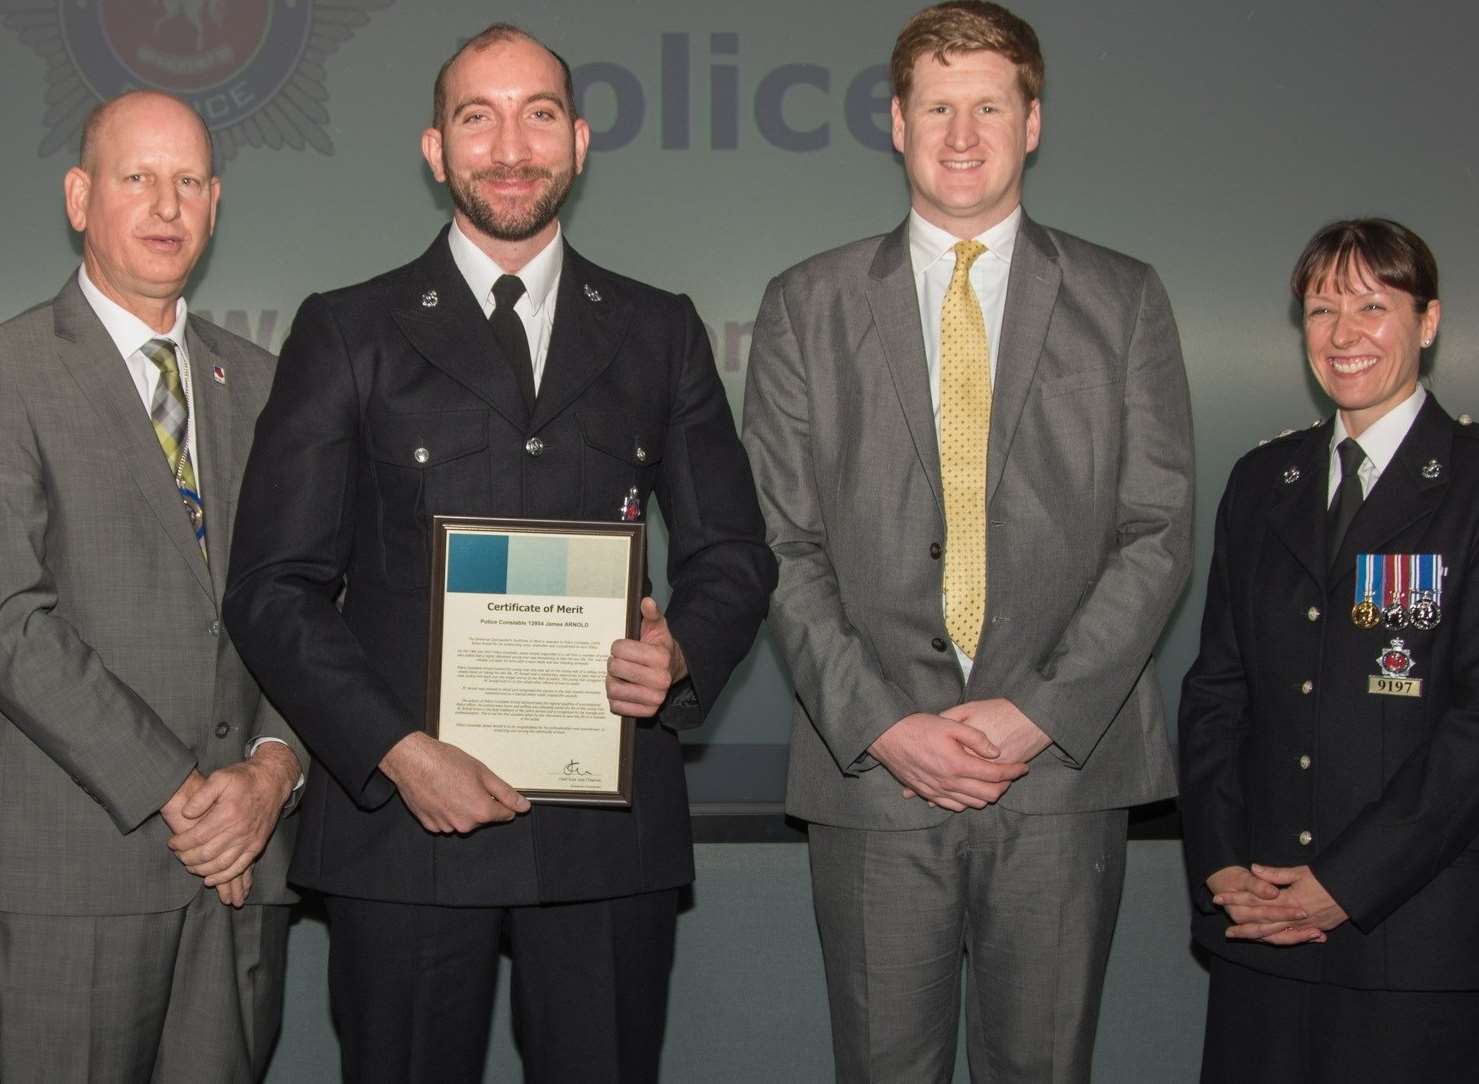 From left, deputy mayor of Maidstone Cllr David Naghi, PC James Arnold, police and crime commissioner Matthew Scott, and Chief Superintendent Julia Chapman